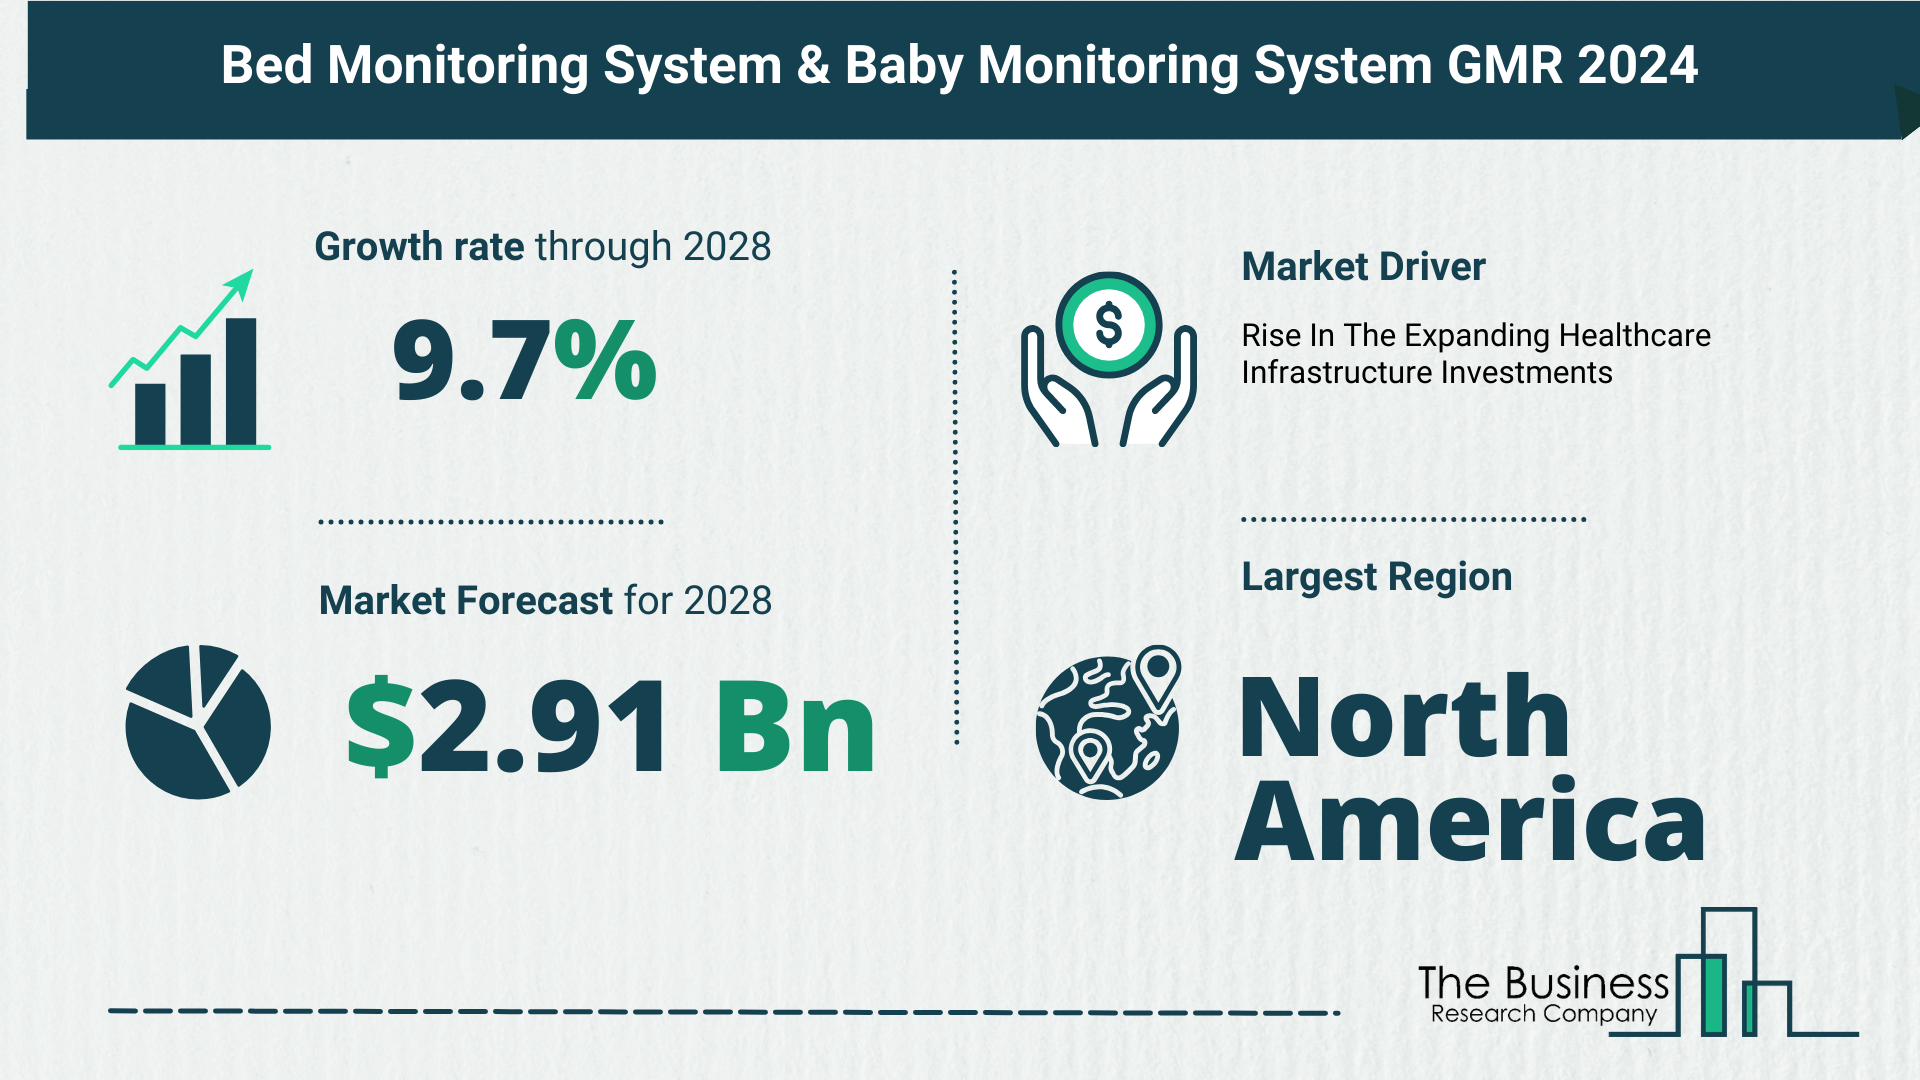 Understand How The Bed Monitoring System And Baby Monitoring System Market Is Poised To Grow Through 2024-2033